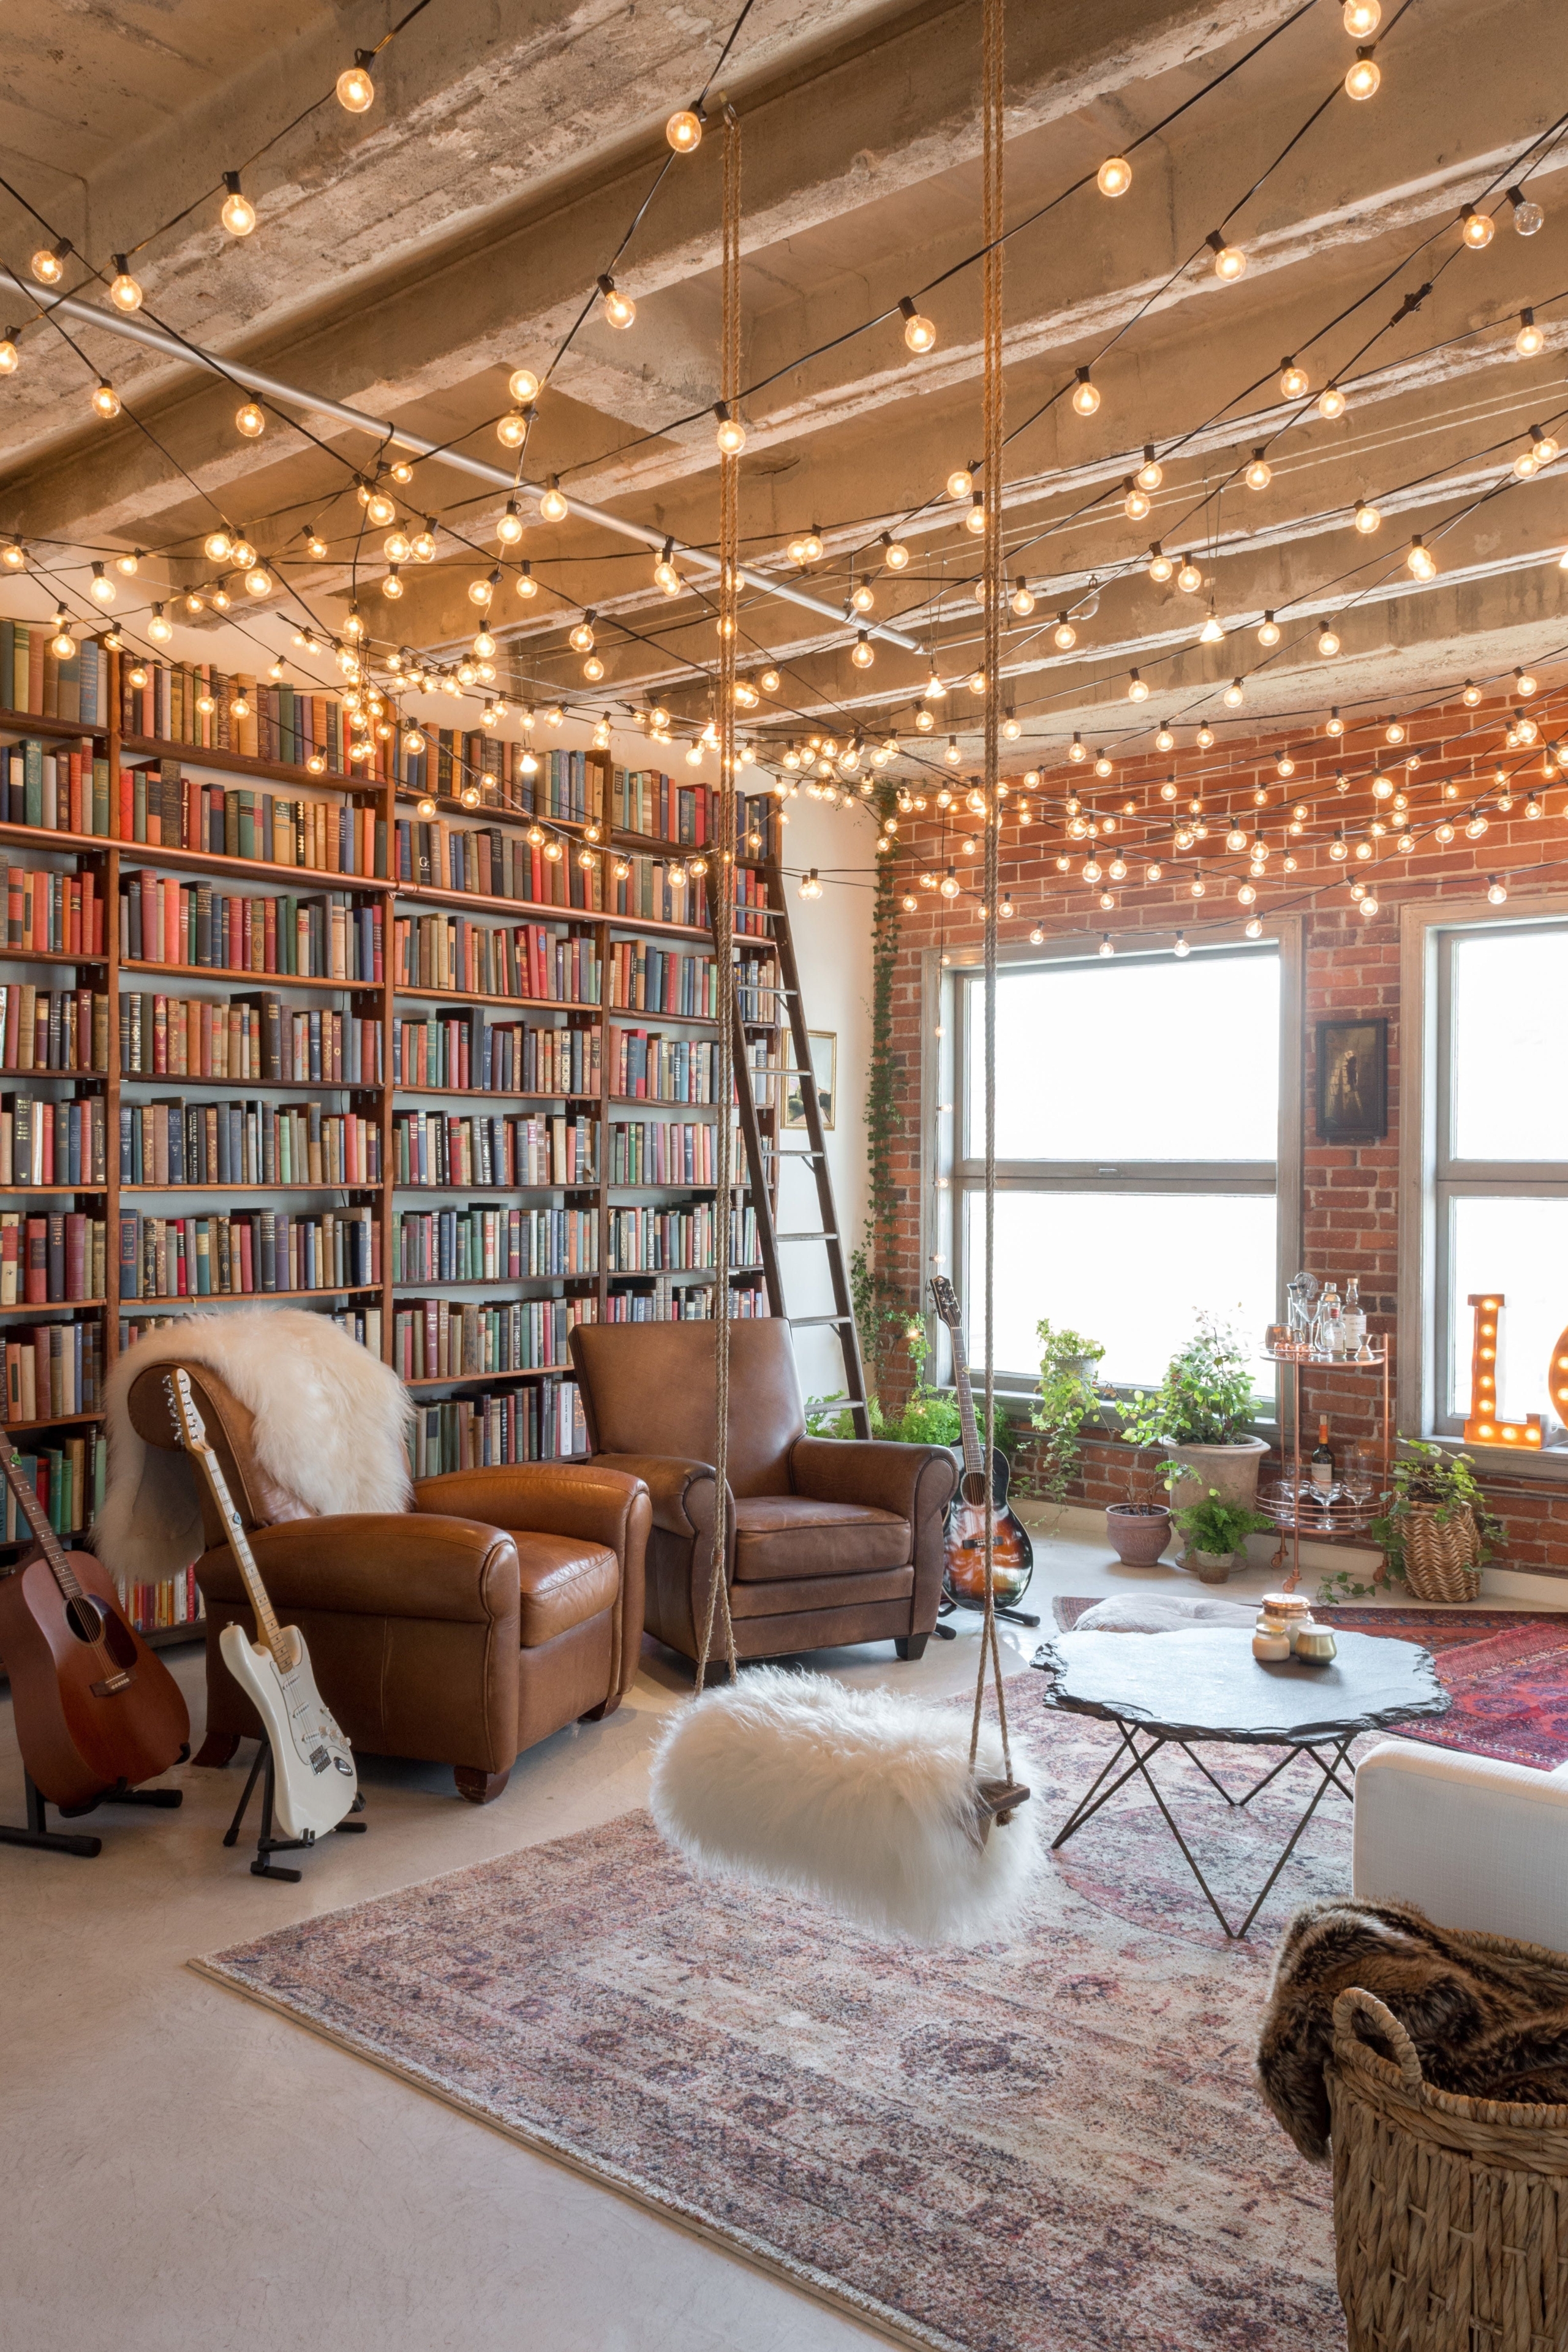 Eclectic Room With Multiple String Lights